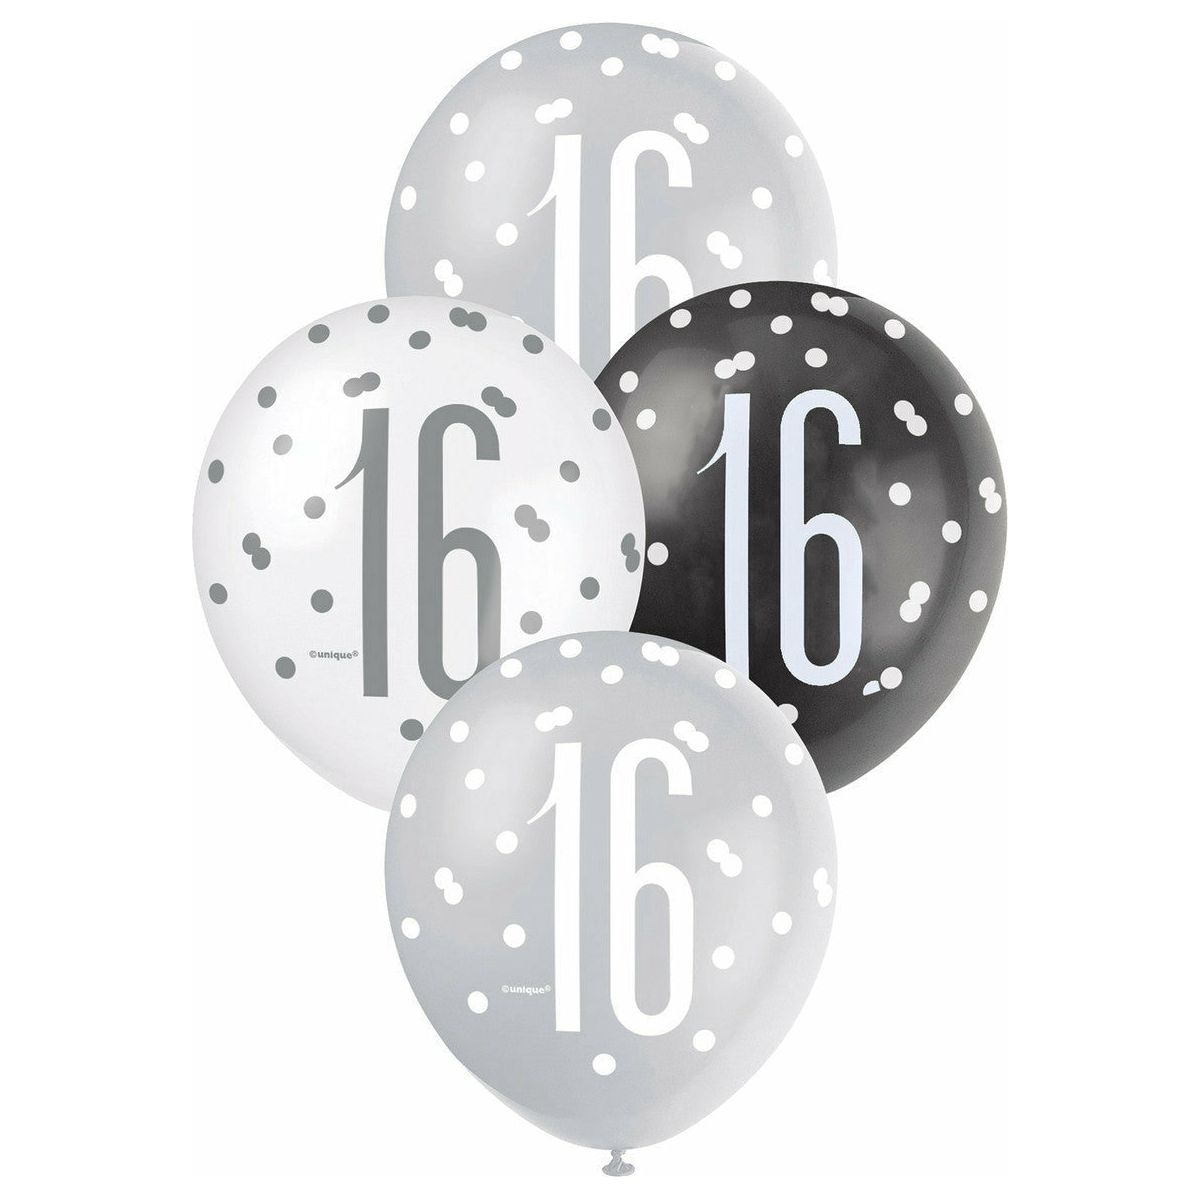 Black Silver and White 16 Latex Balloons - 30cm Assorted 6 Pack 1 Piece - Dollars and Sense